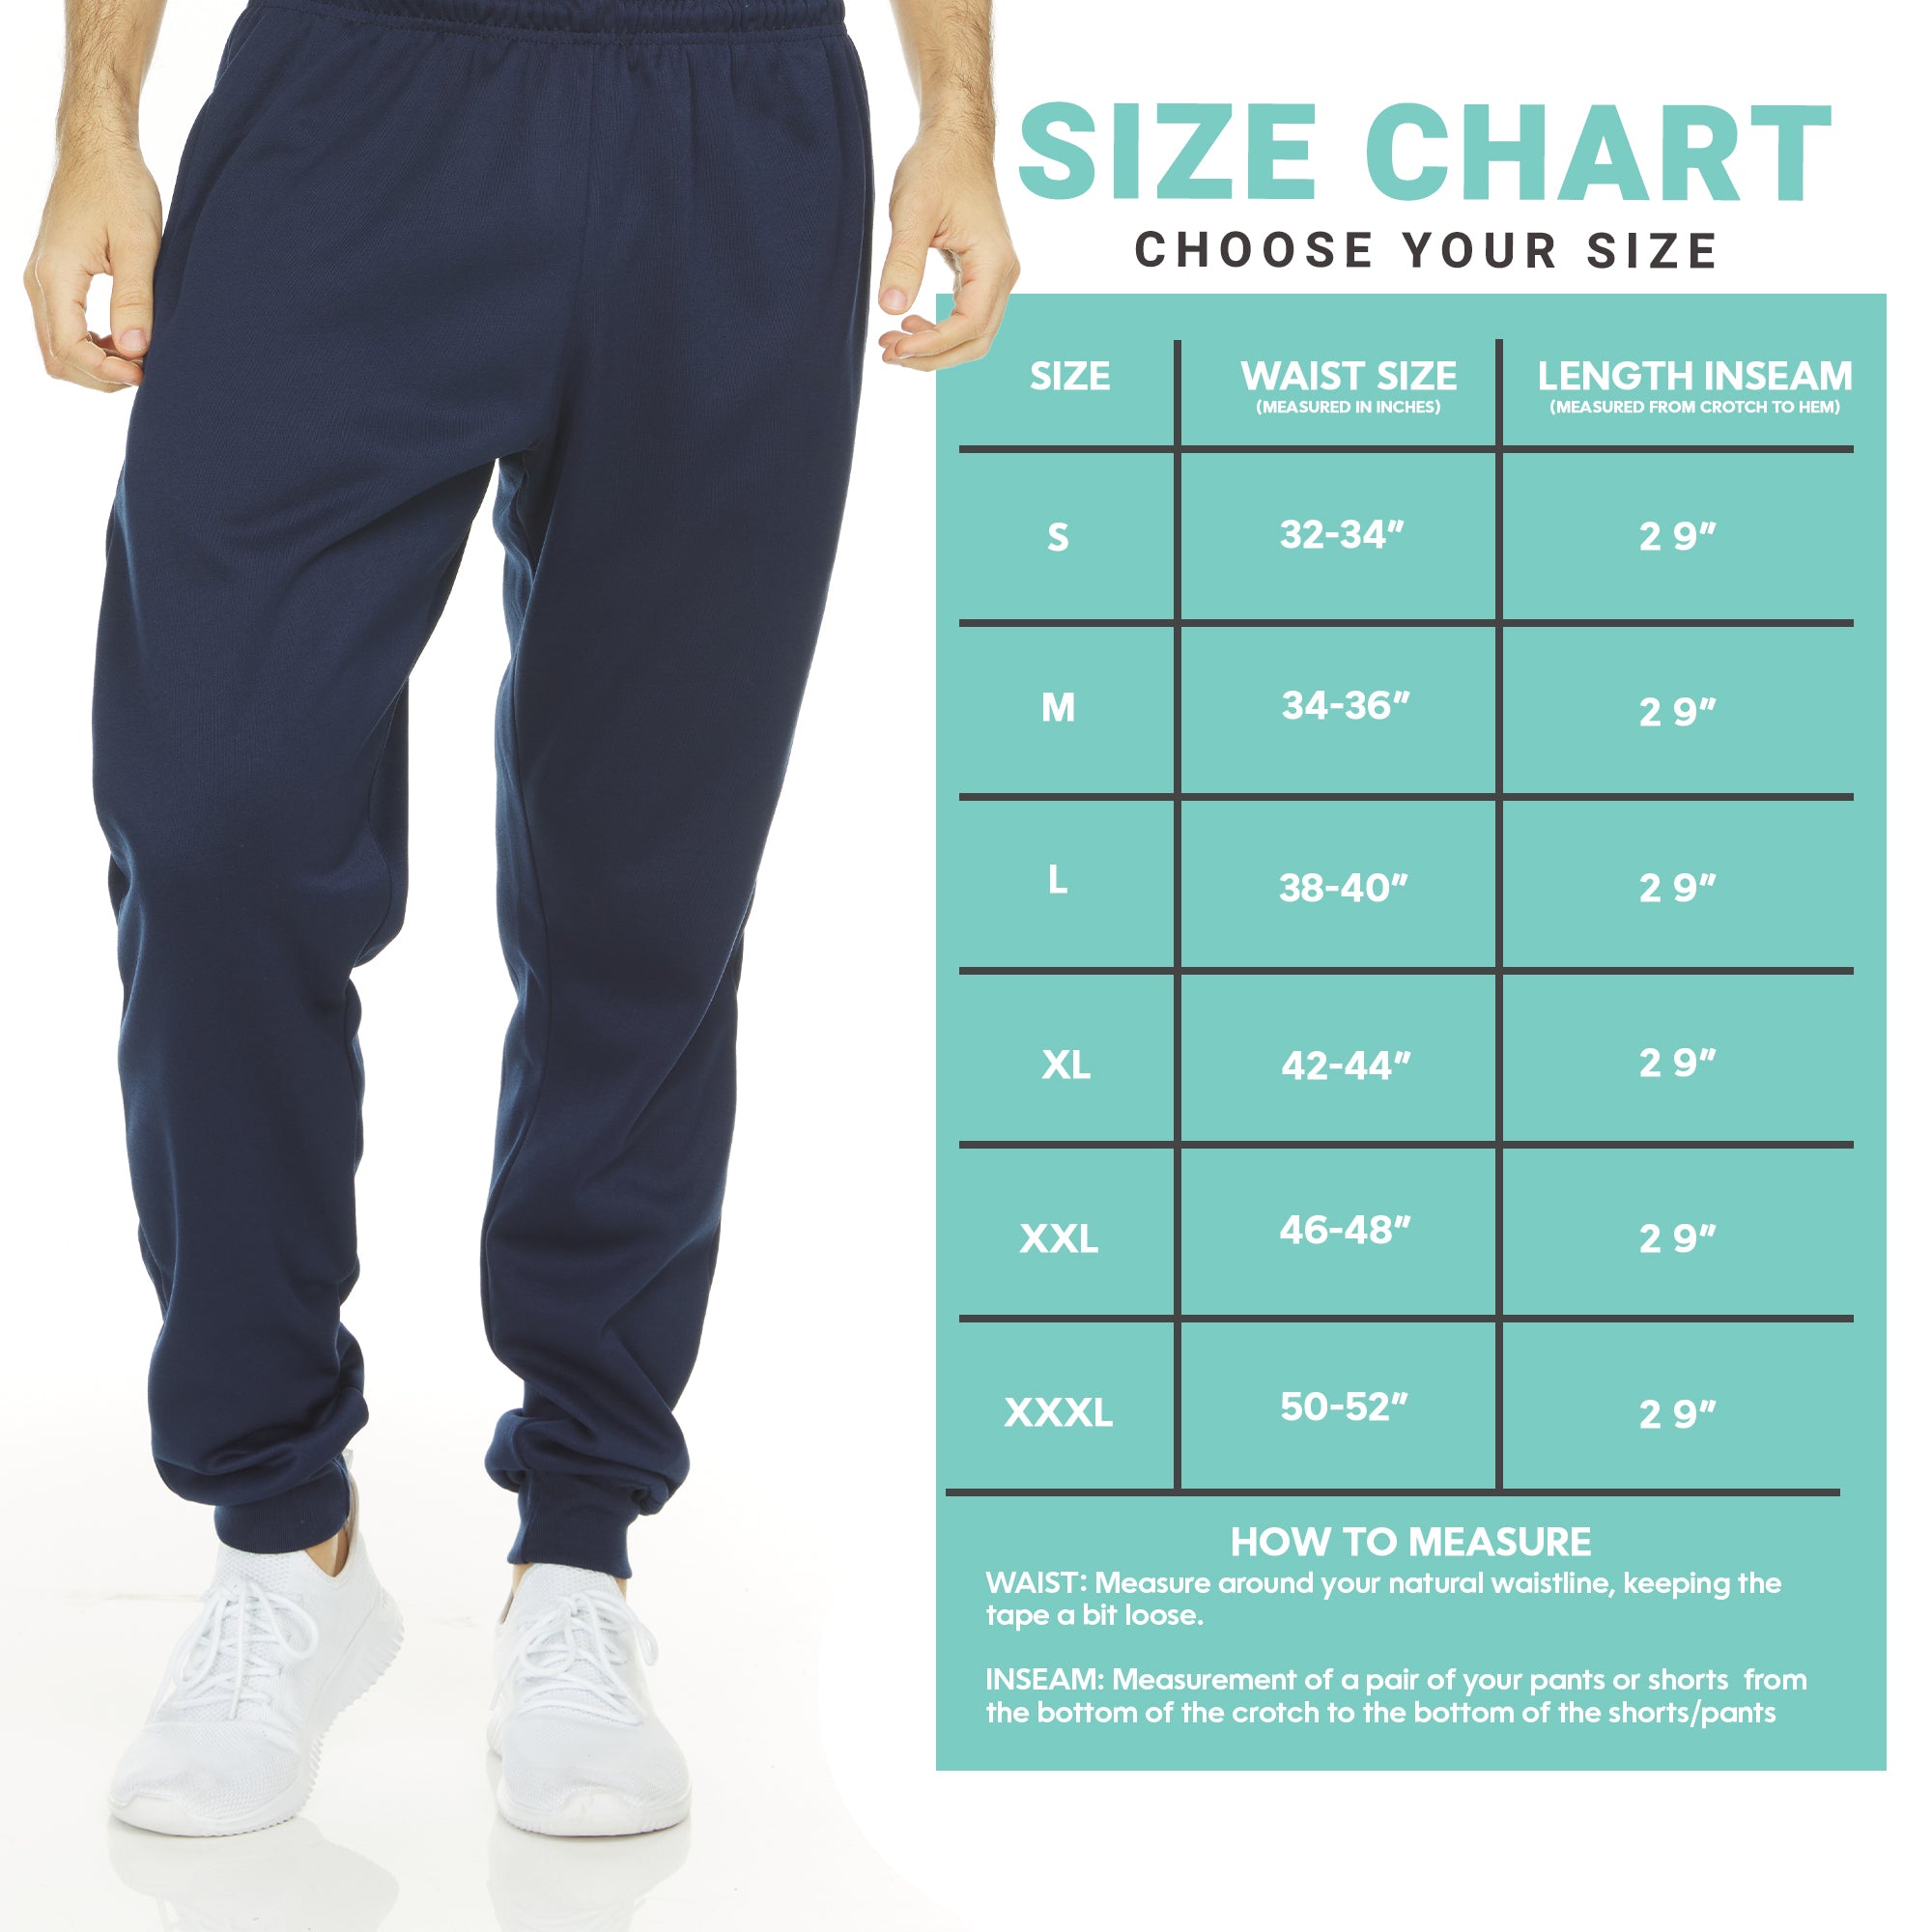 DARESAY 3 Pack: Men's Athletic Pants with Pockets, Mens Sweatpants, Workout  Pants for Men with Pockets (Up to 3XL)